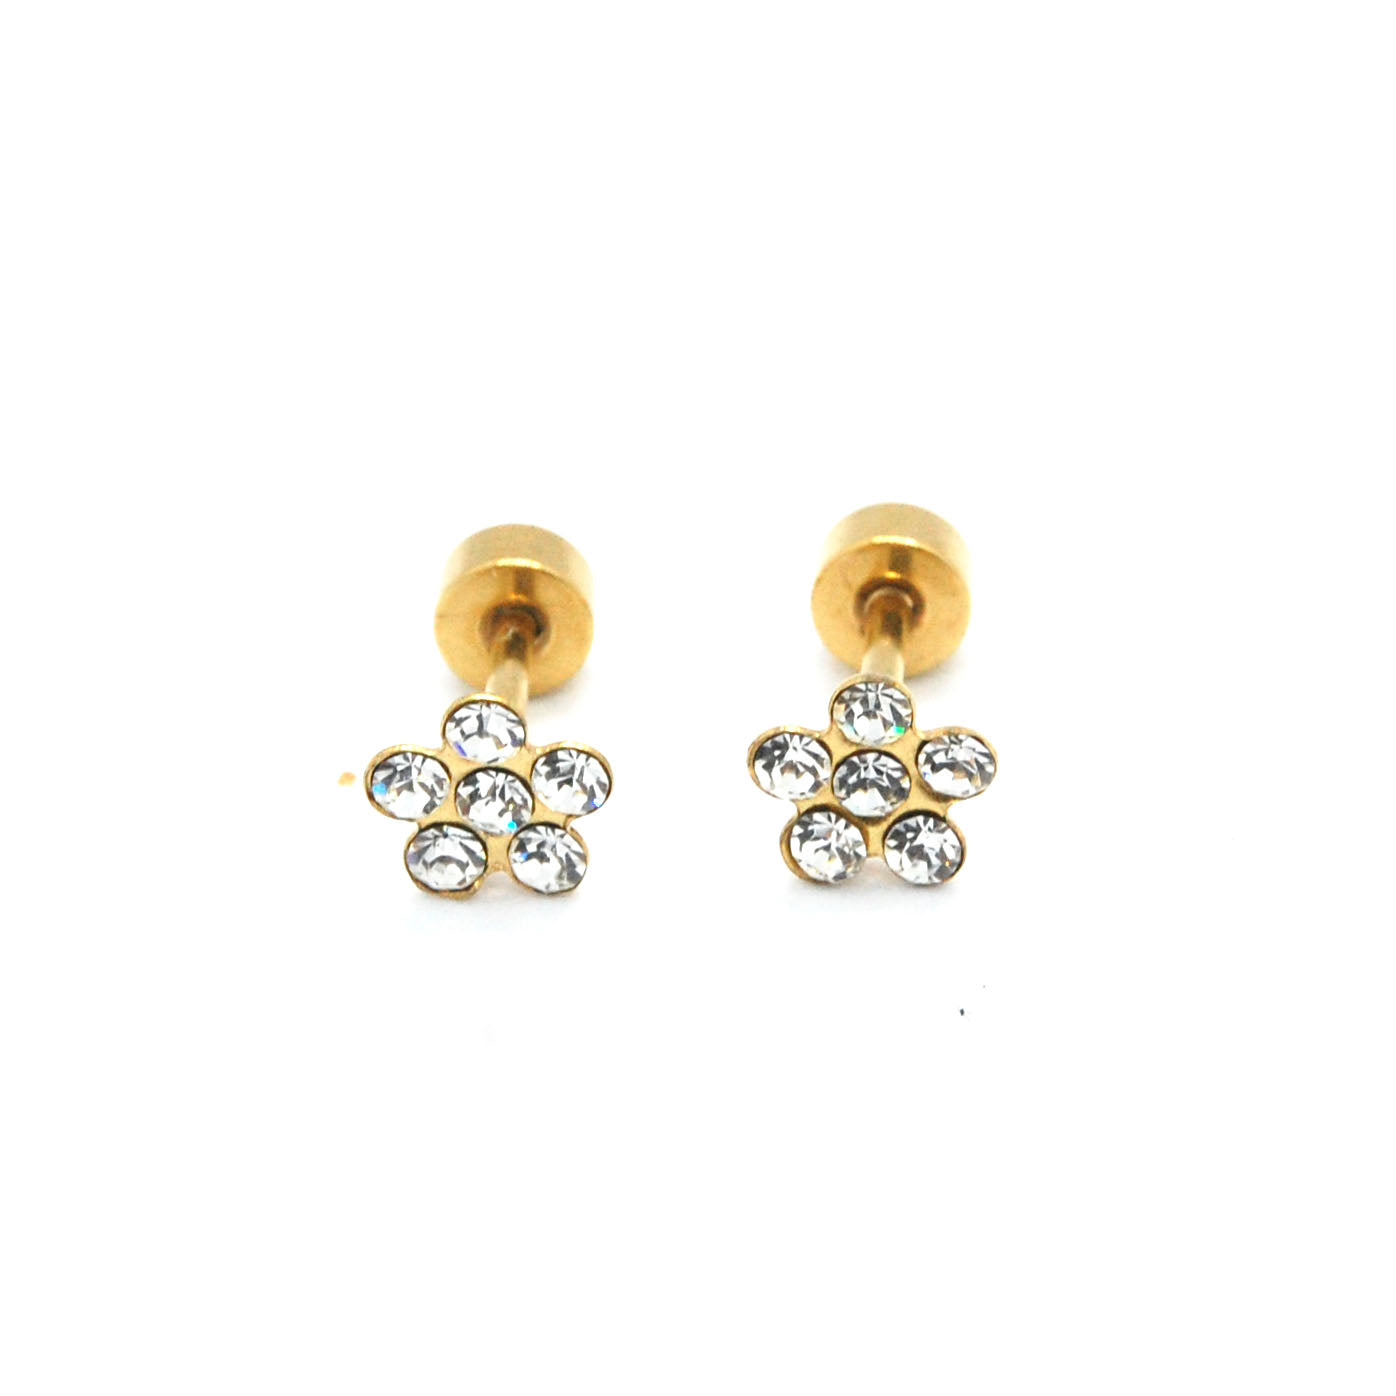 ESE 7665: Gold-Plated 6-Cubic Zirconia Rositas Earrings w/ Child Safe Chapita